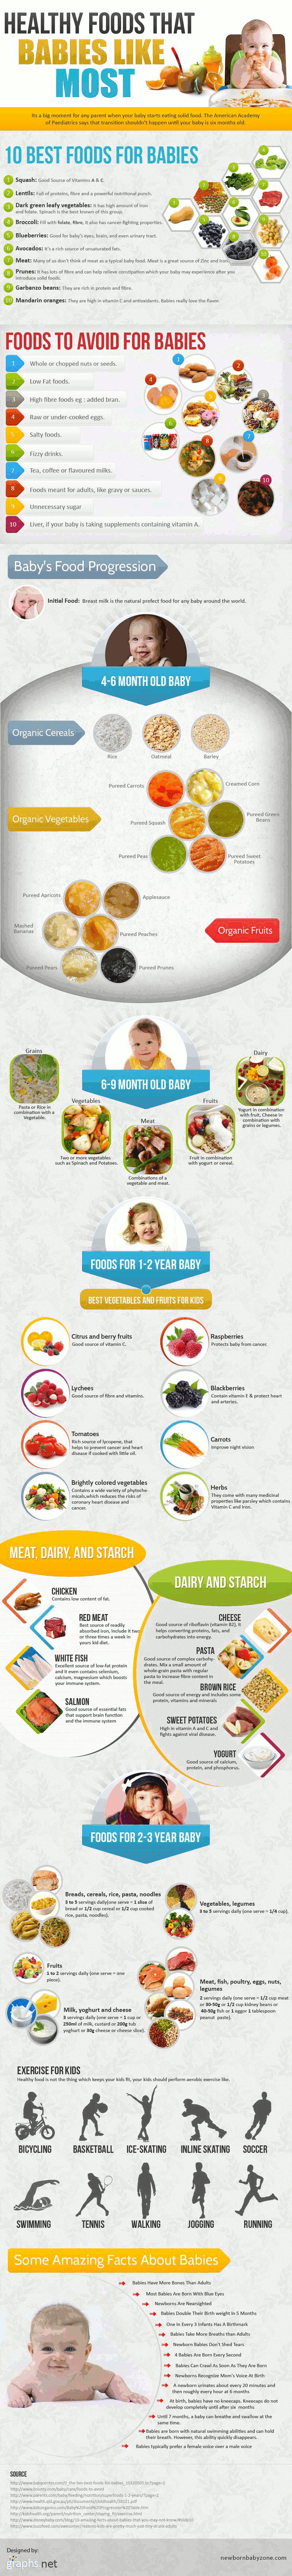 Healthy Foods That Babies Like Most